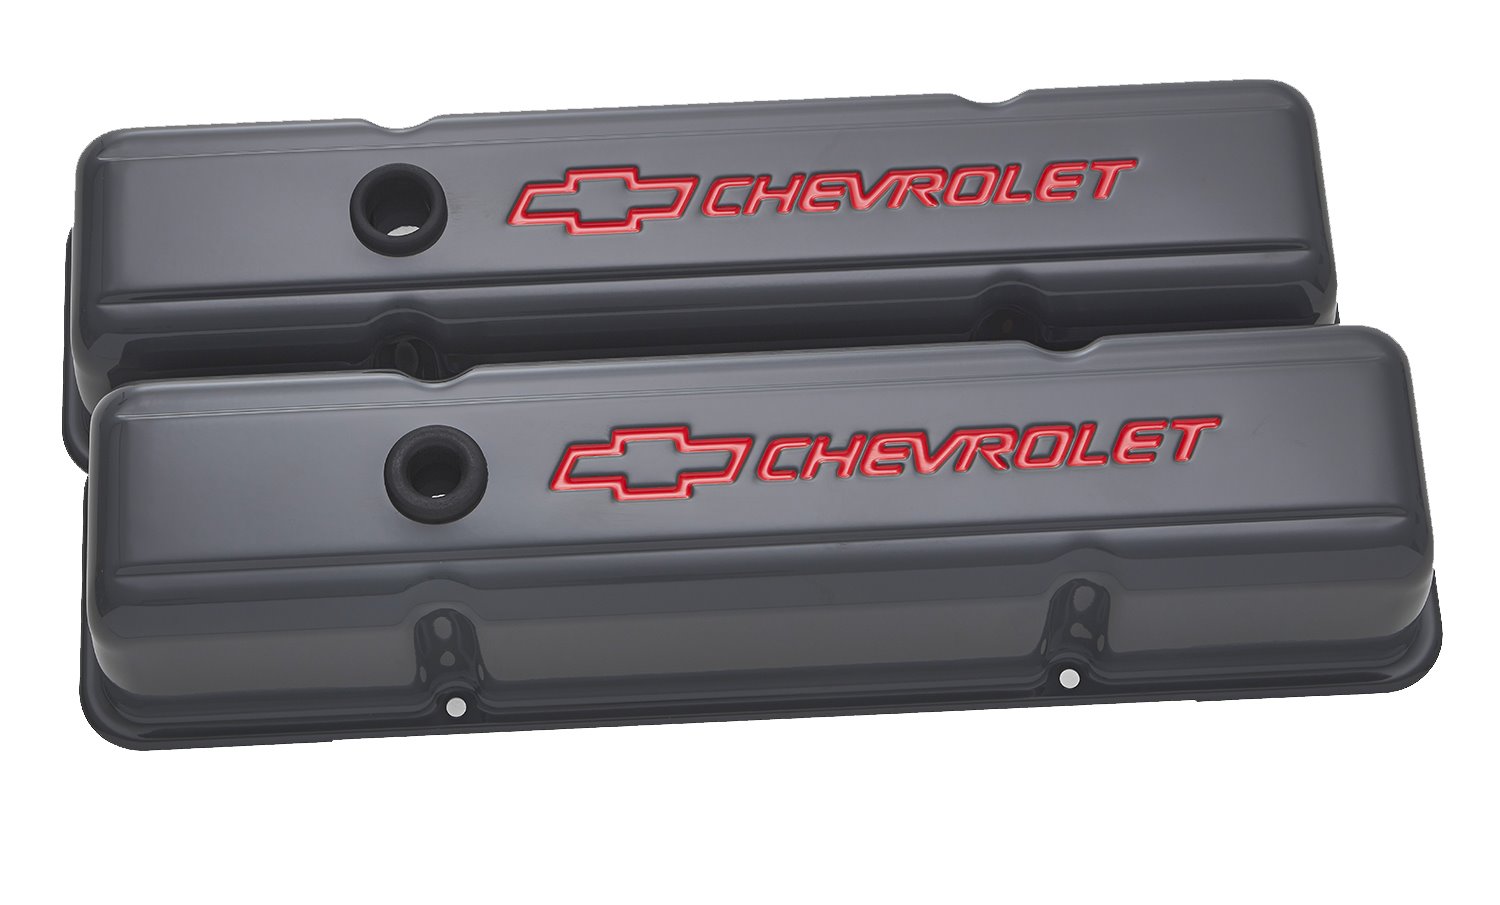 Stamped Steel Tall Valve Covers for 1959-1986 Small Block Chevy with Chevrolet/Bowtie Recessed Emblem in Shark Gray Finish